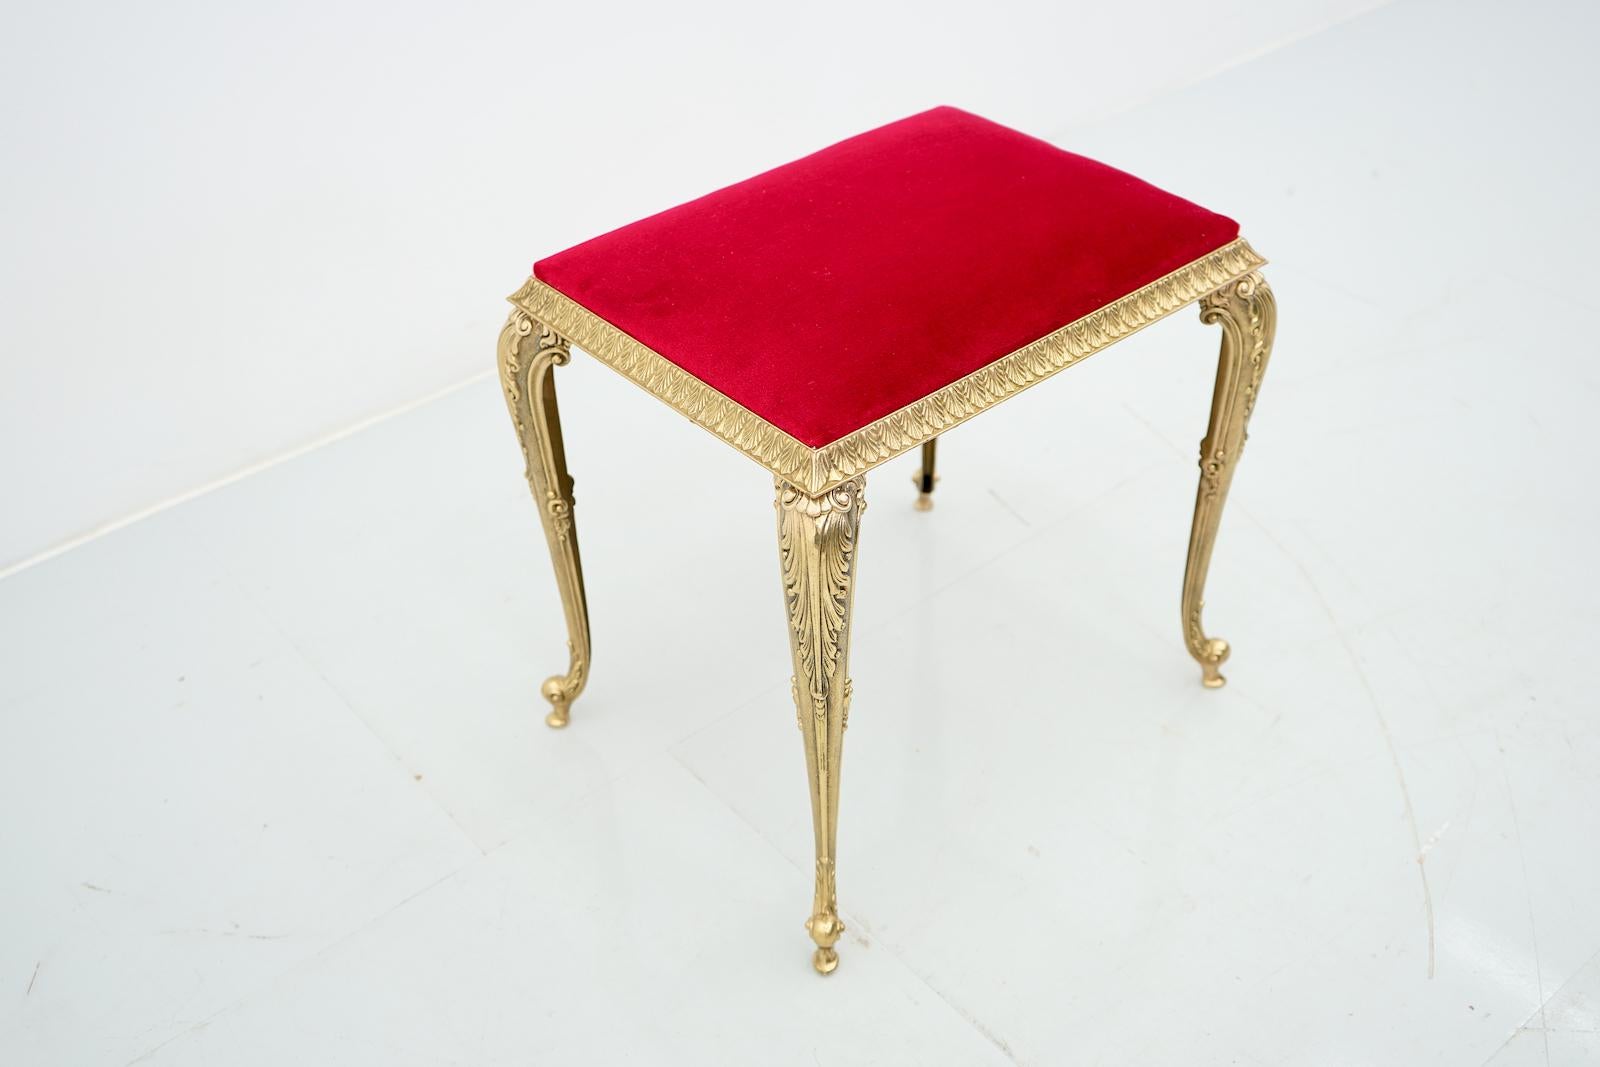 Decorative Brass Stool with Red Fabric, circa 1970s For Sale 2